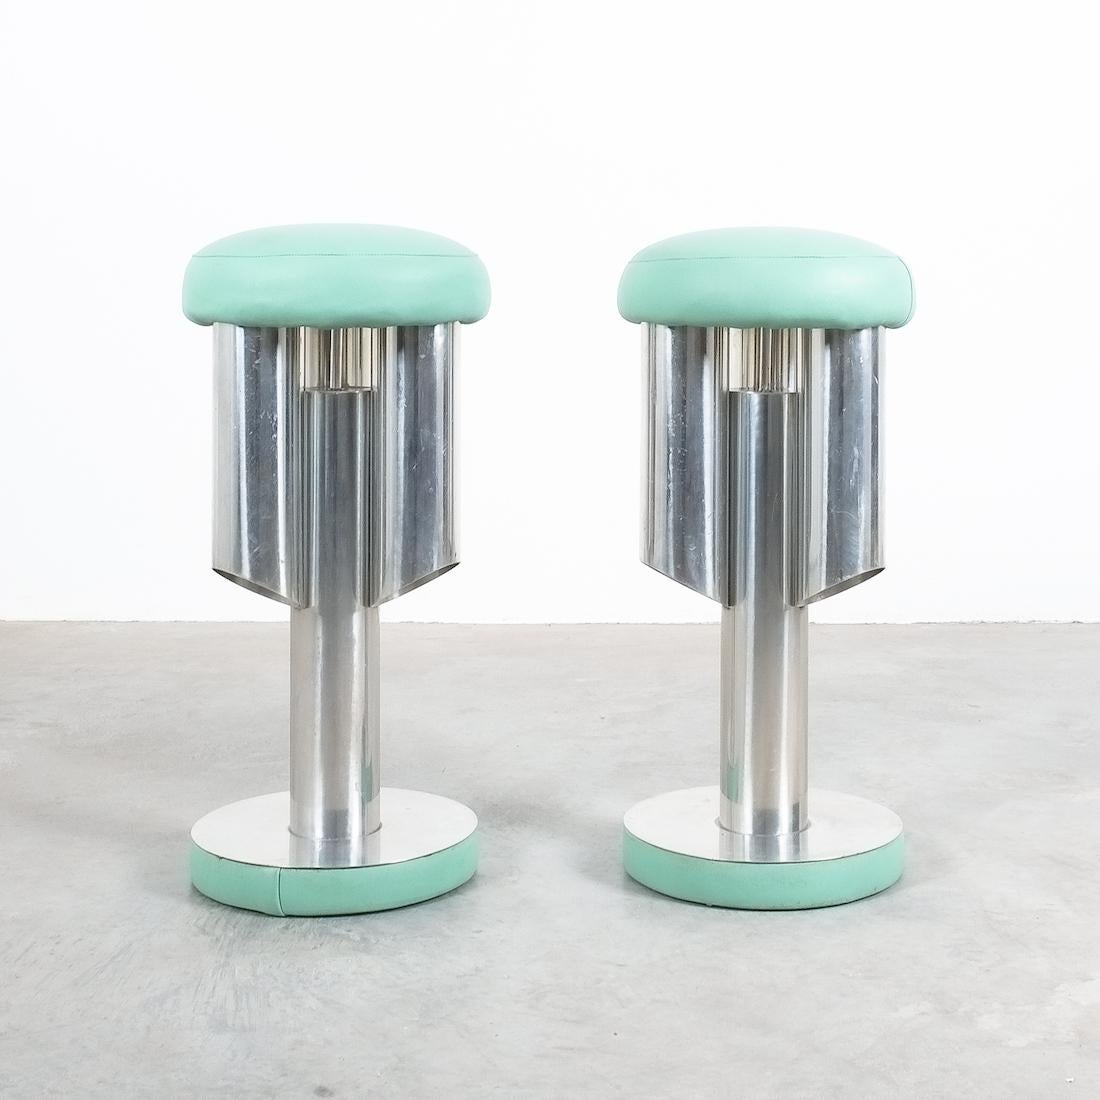 Great pair of aeronautical rocket chairs or bar stools from Italy, circa 1970 - priced as a pair

One of a kind pair of barstools with a set-height of 28